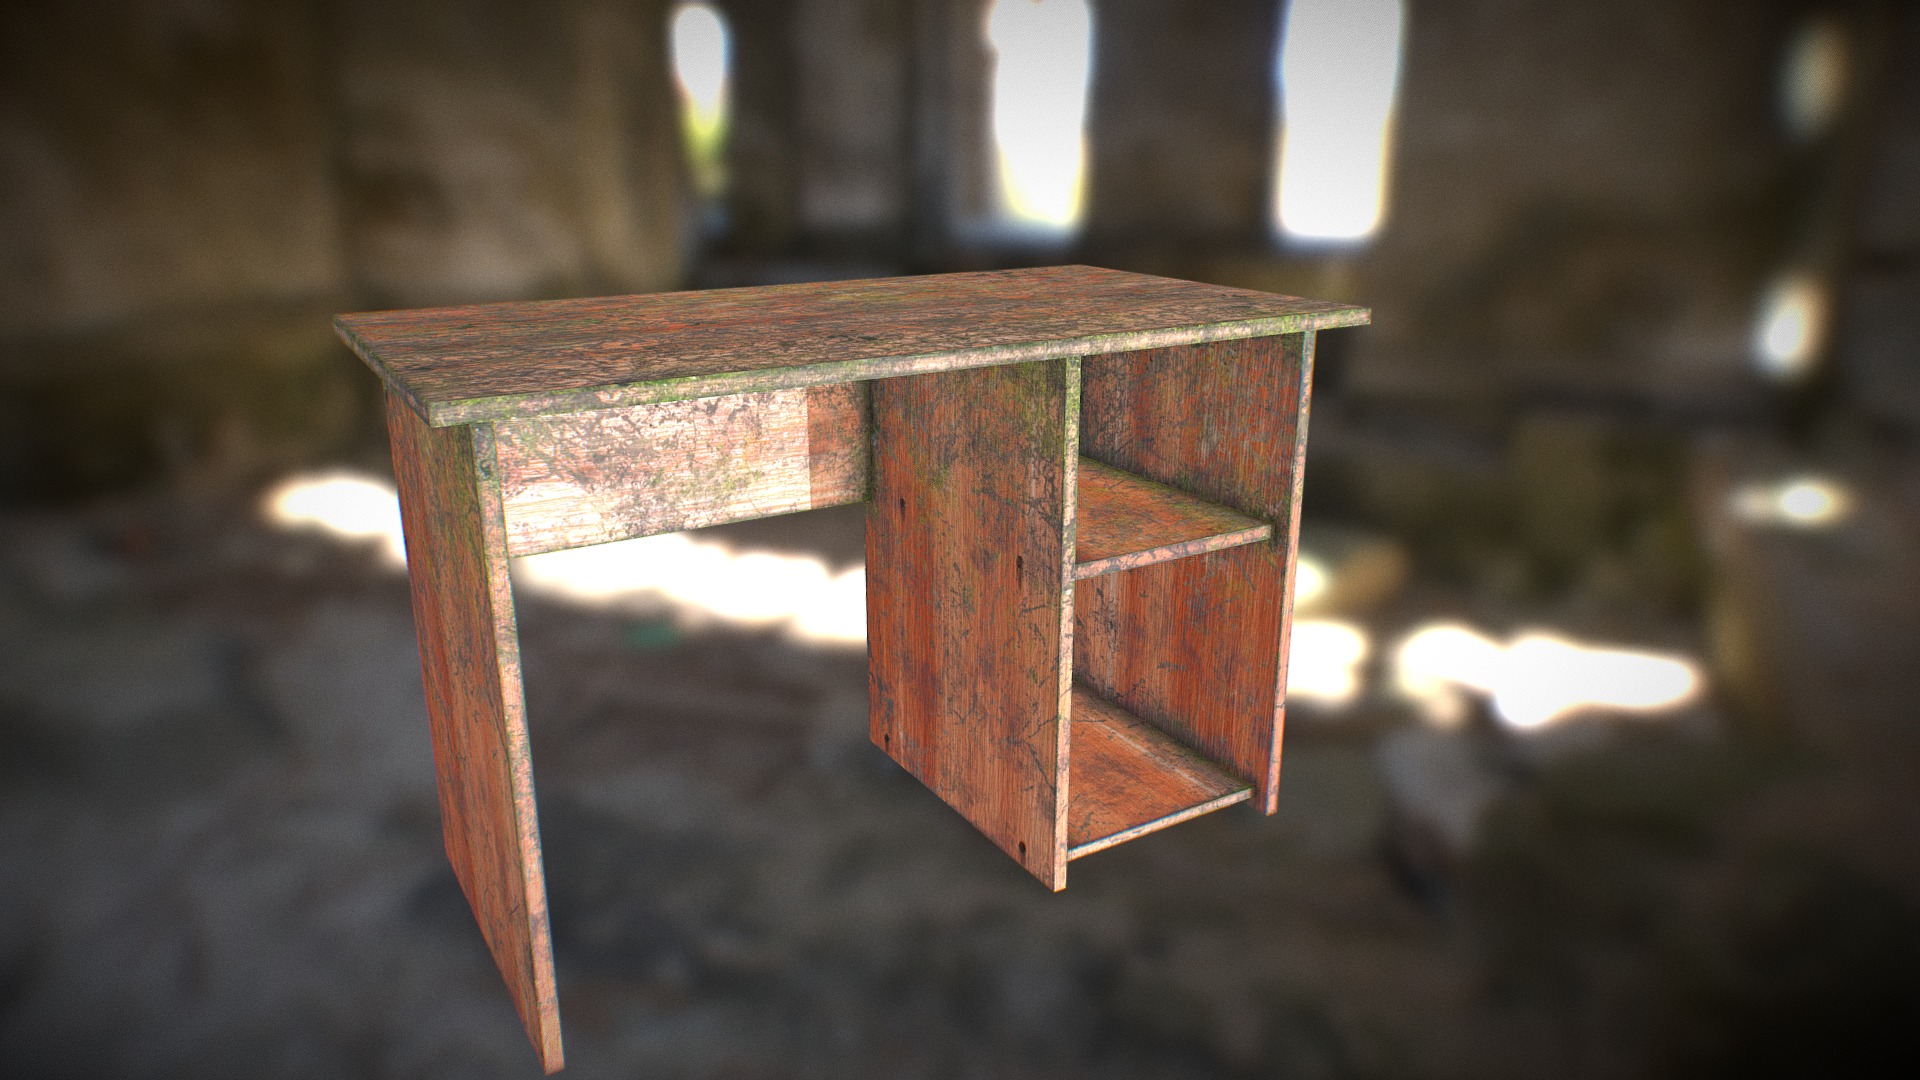 3D model Rotten table_3 - This is a 3D model of the Rotten table_3. The 3D model is about a wooden table in a dark room.